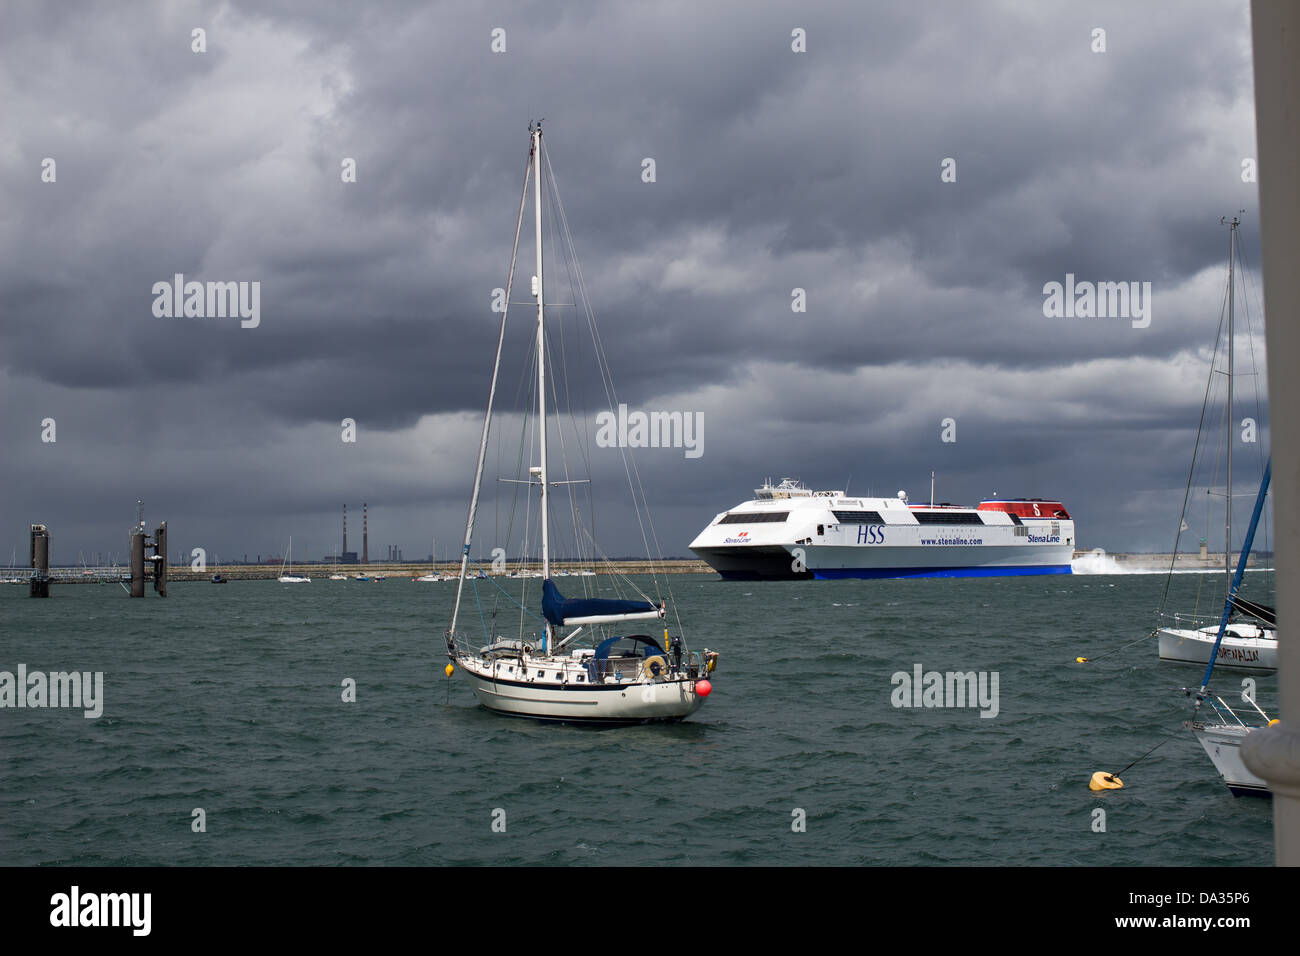 A ferry is about to dock in Dún Laoghaire harbor. Stock Photo